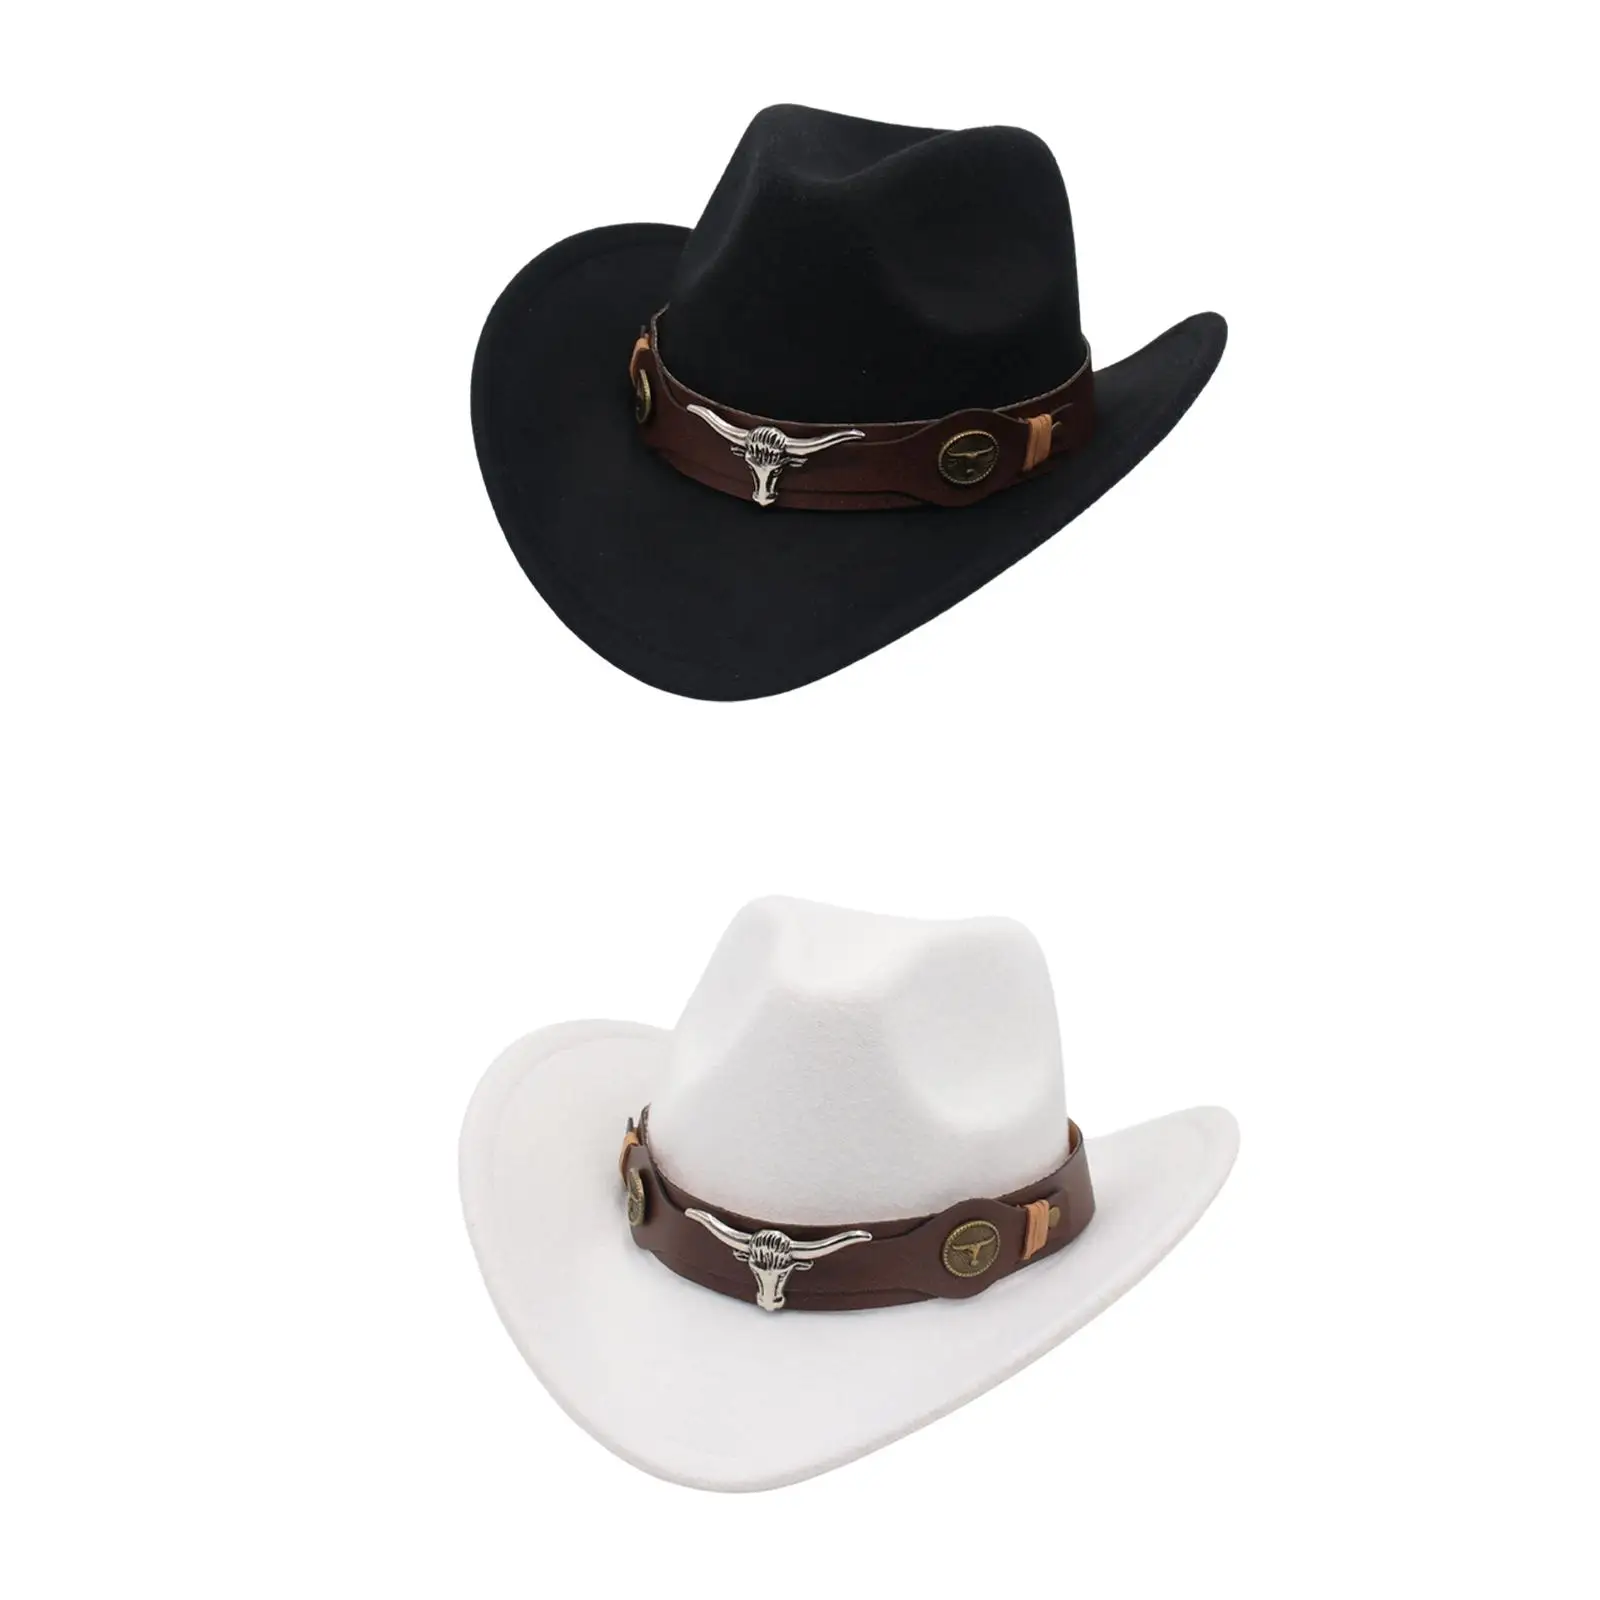 Casual Western Cowboy Hat Props Wide Brim Cosplay Costume Summer Sunshade Sun Hat for Adults Women Men Outdoor, Camping, Travel